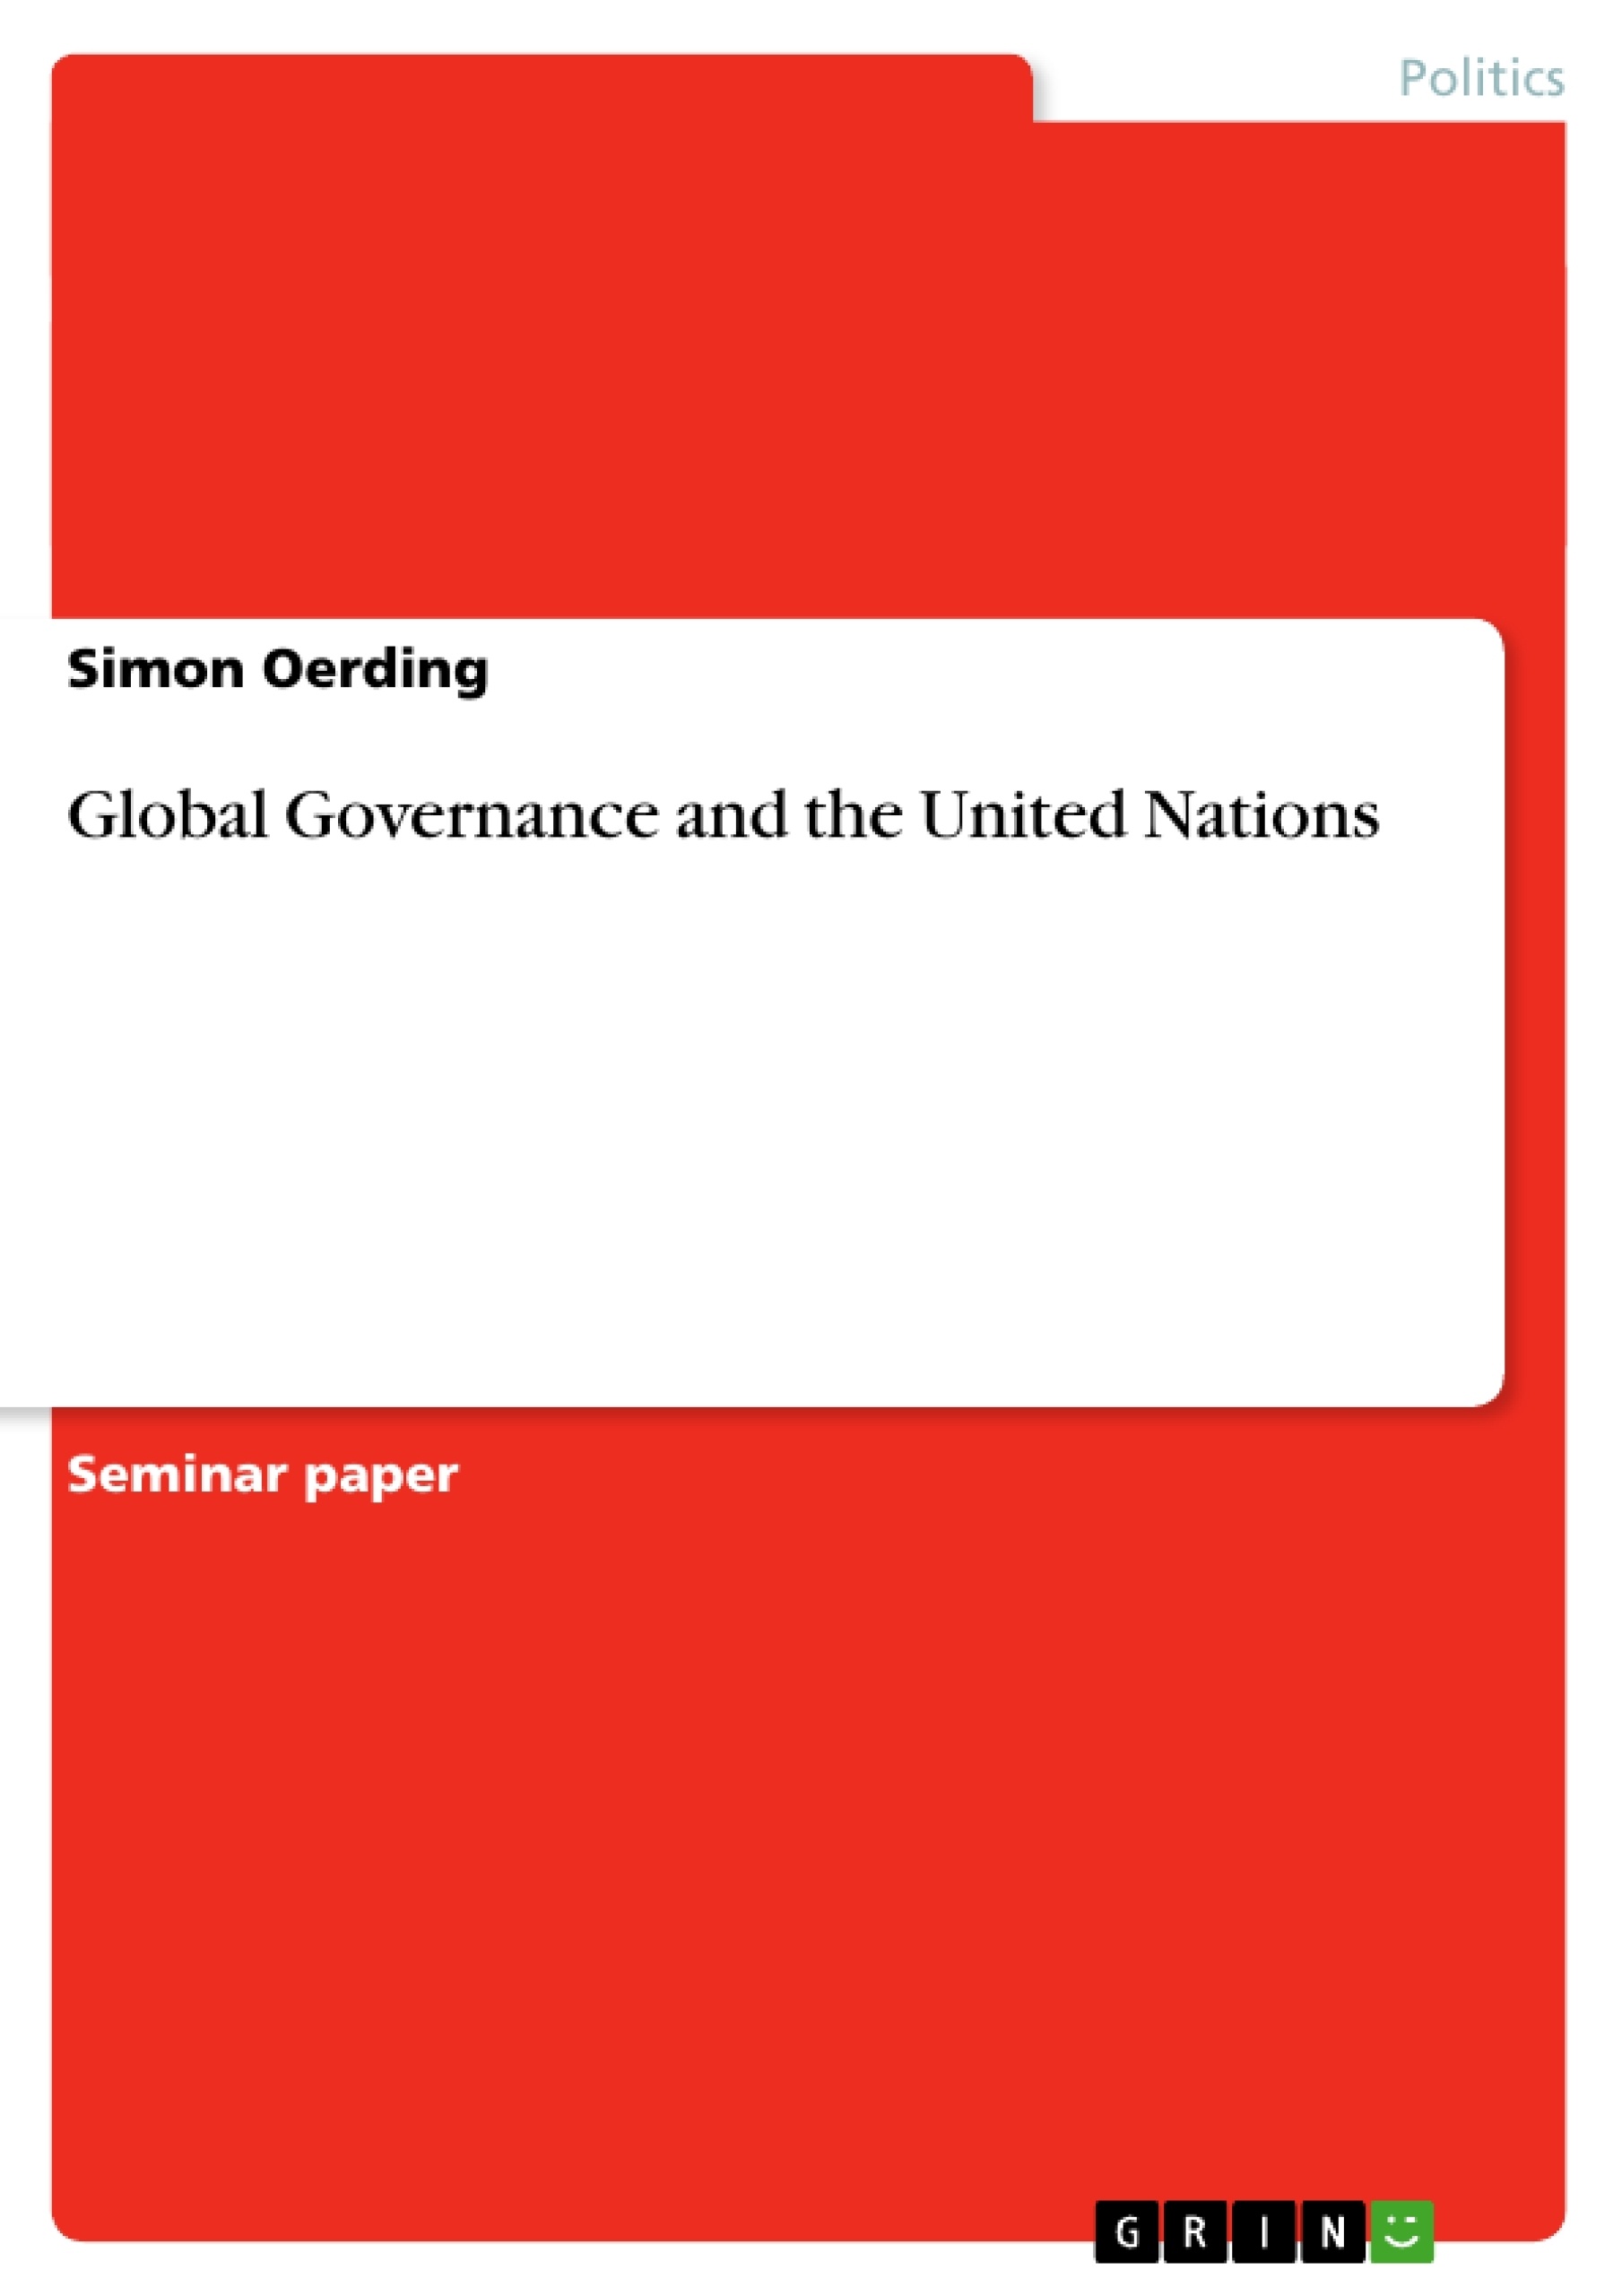 Title: Global Governance and the United Nations